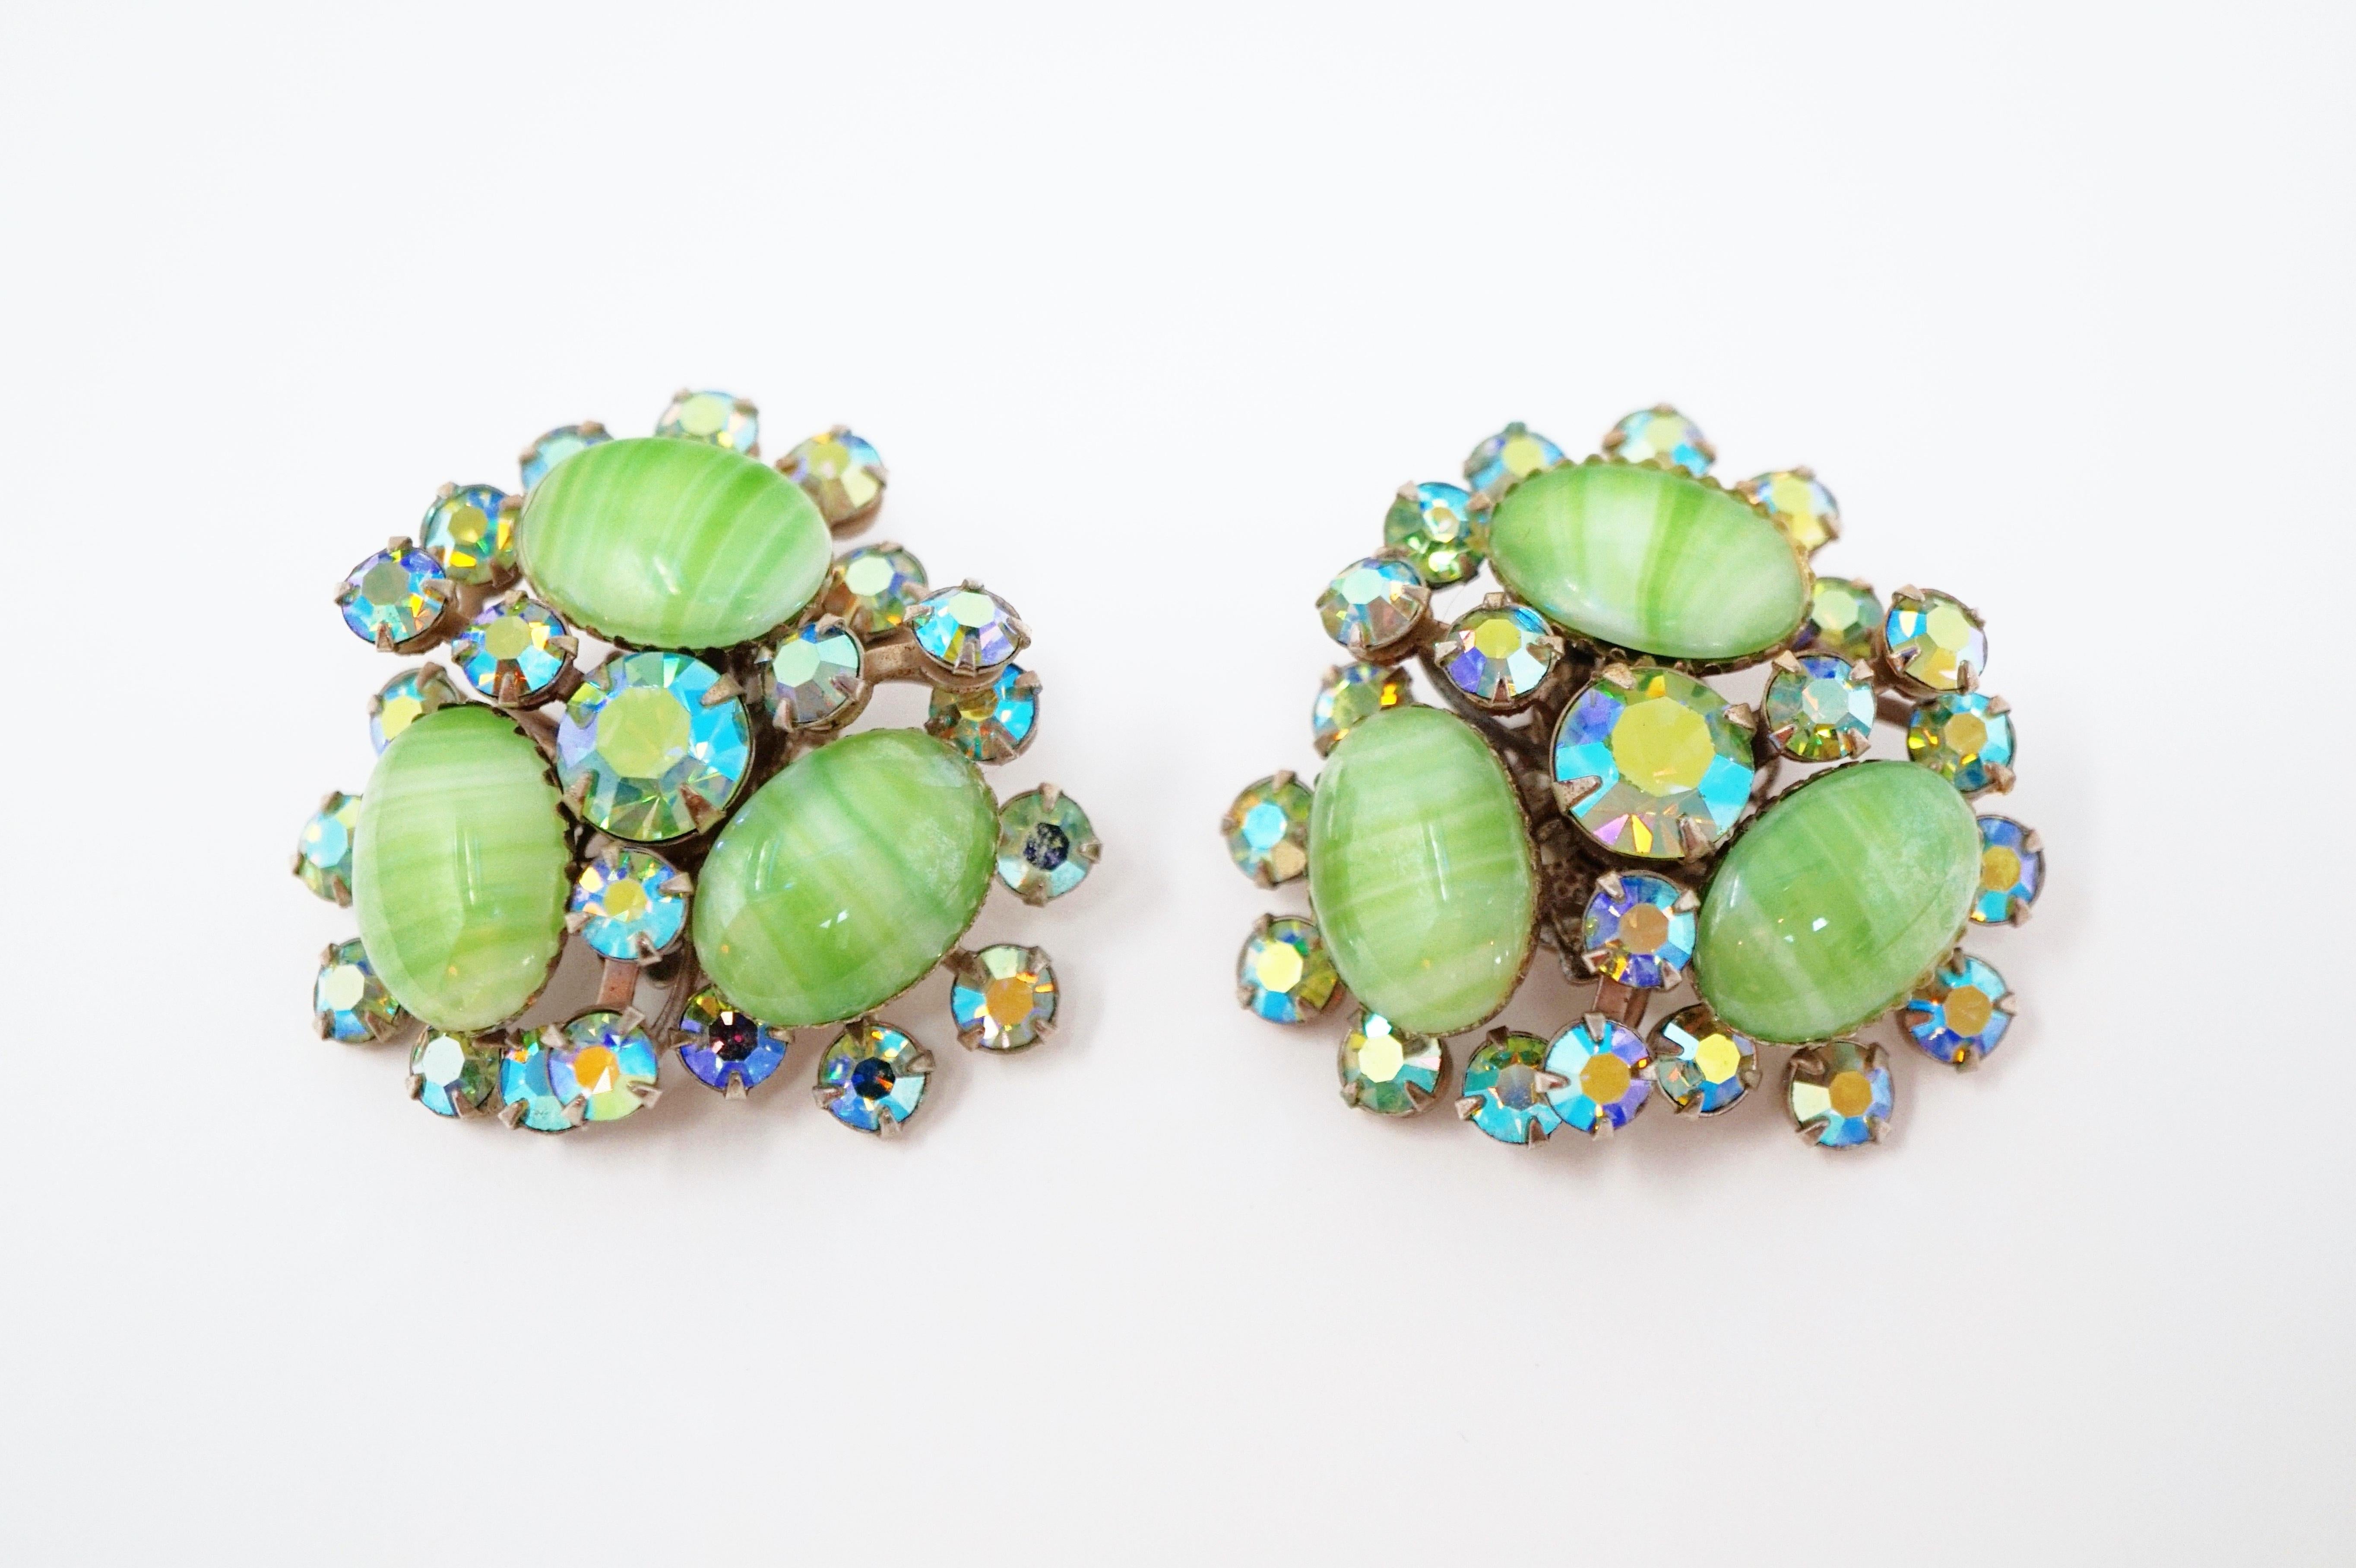 These stunning vintage Juliana-style statement earrings from the mid-century era make a truly unique statement! A three-dimensional cluster of mint green Givre art glass stones, accented with Aurora Borealis rhinestones prong set in silver tone